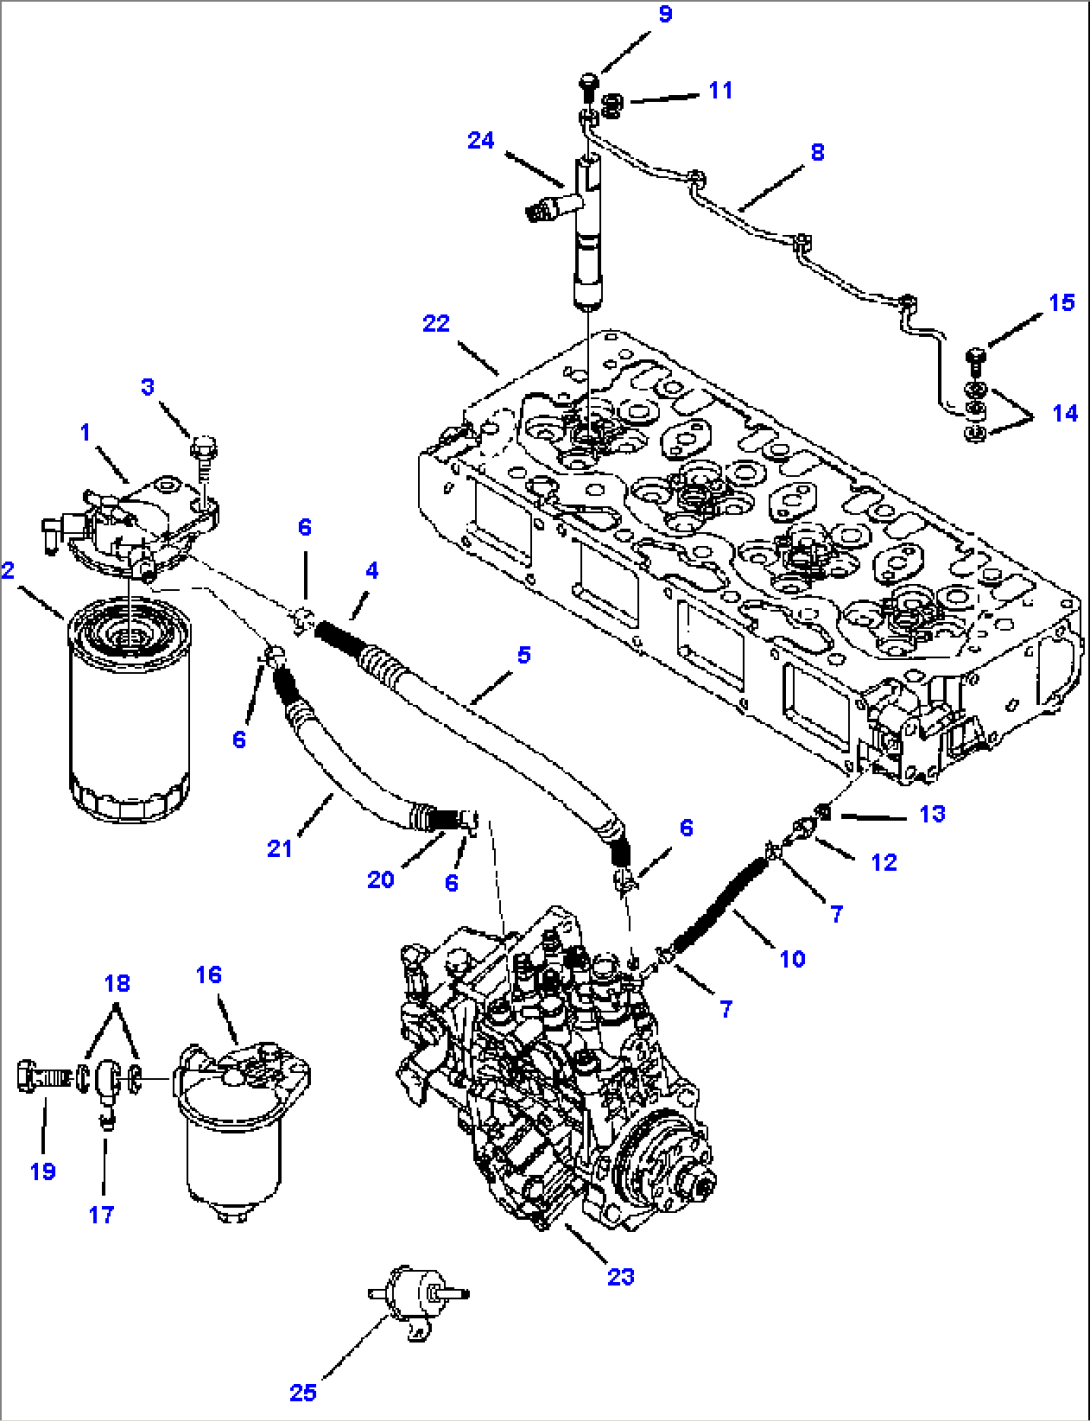 FIG. A0130-01A1 ENGINE - FUEL LINES AND SPIN-ON FUEL FILTER